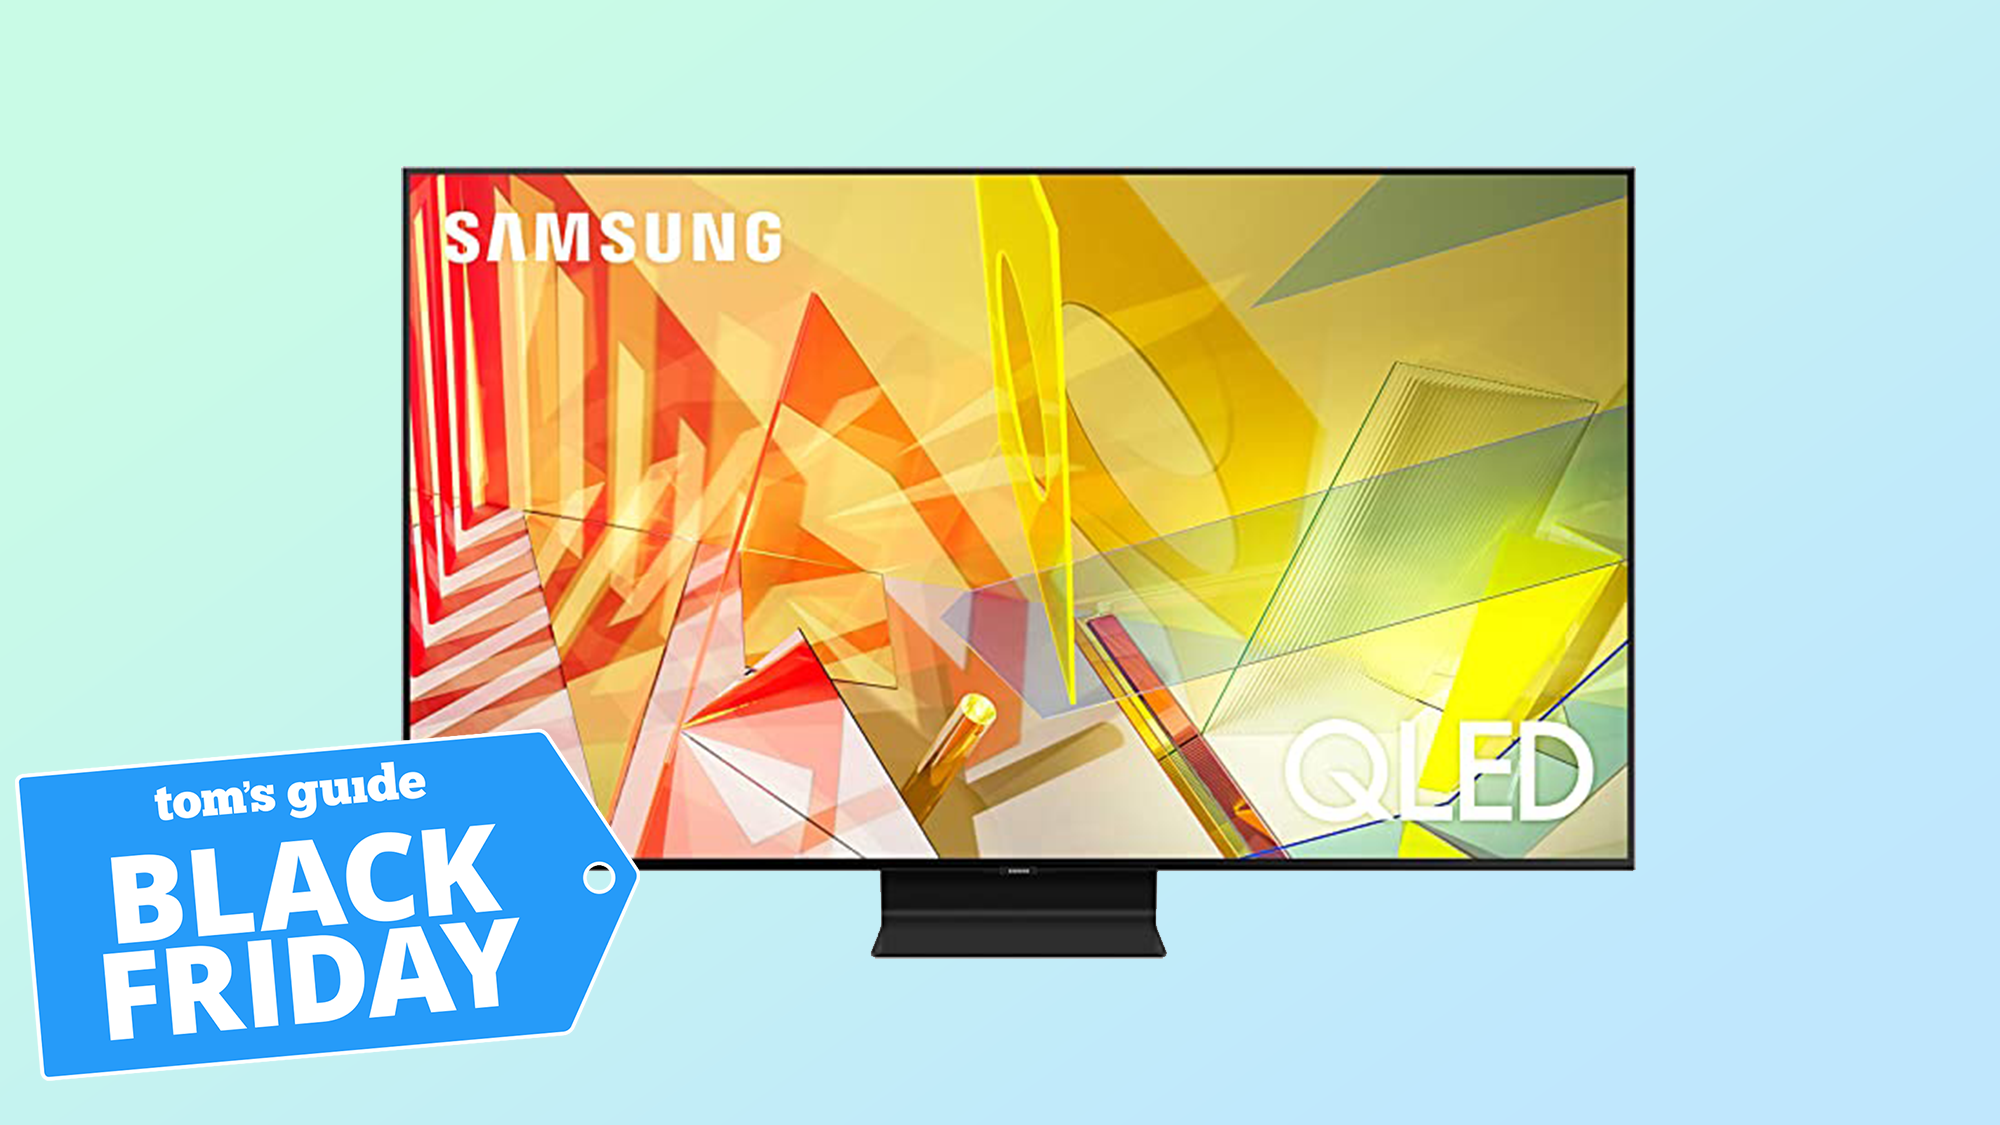 Image of Samsung 65-inch 4K QLED Q90T TV with Black Friday tag